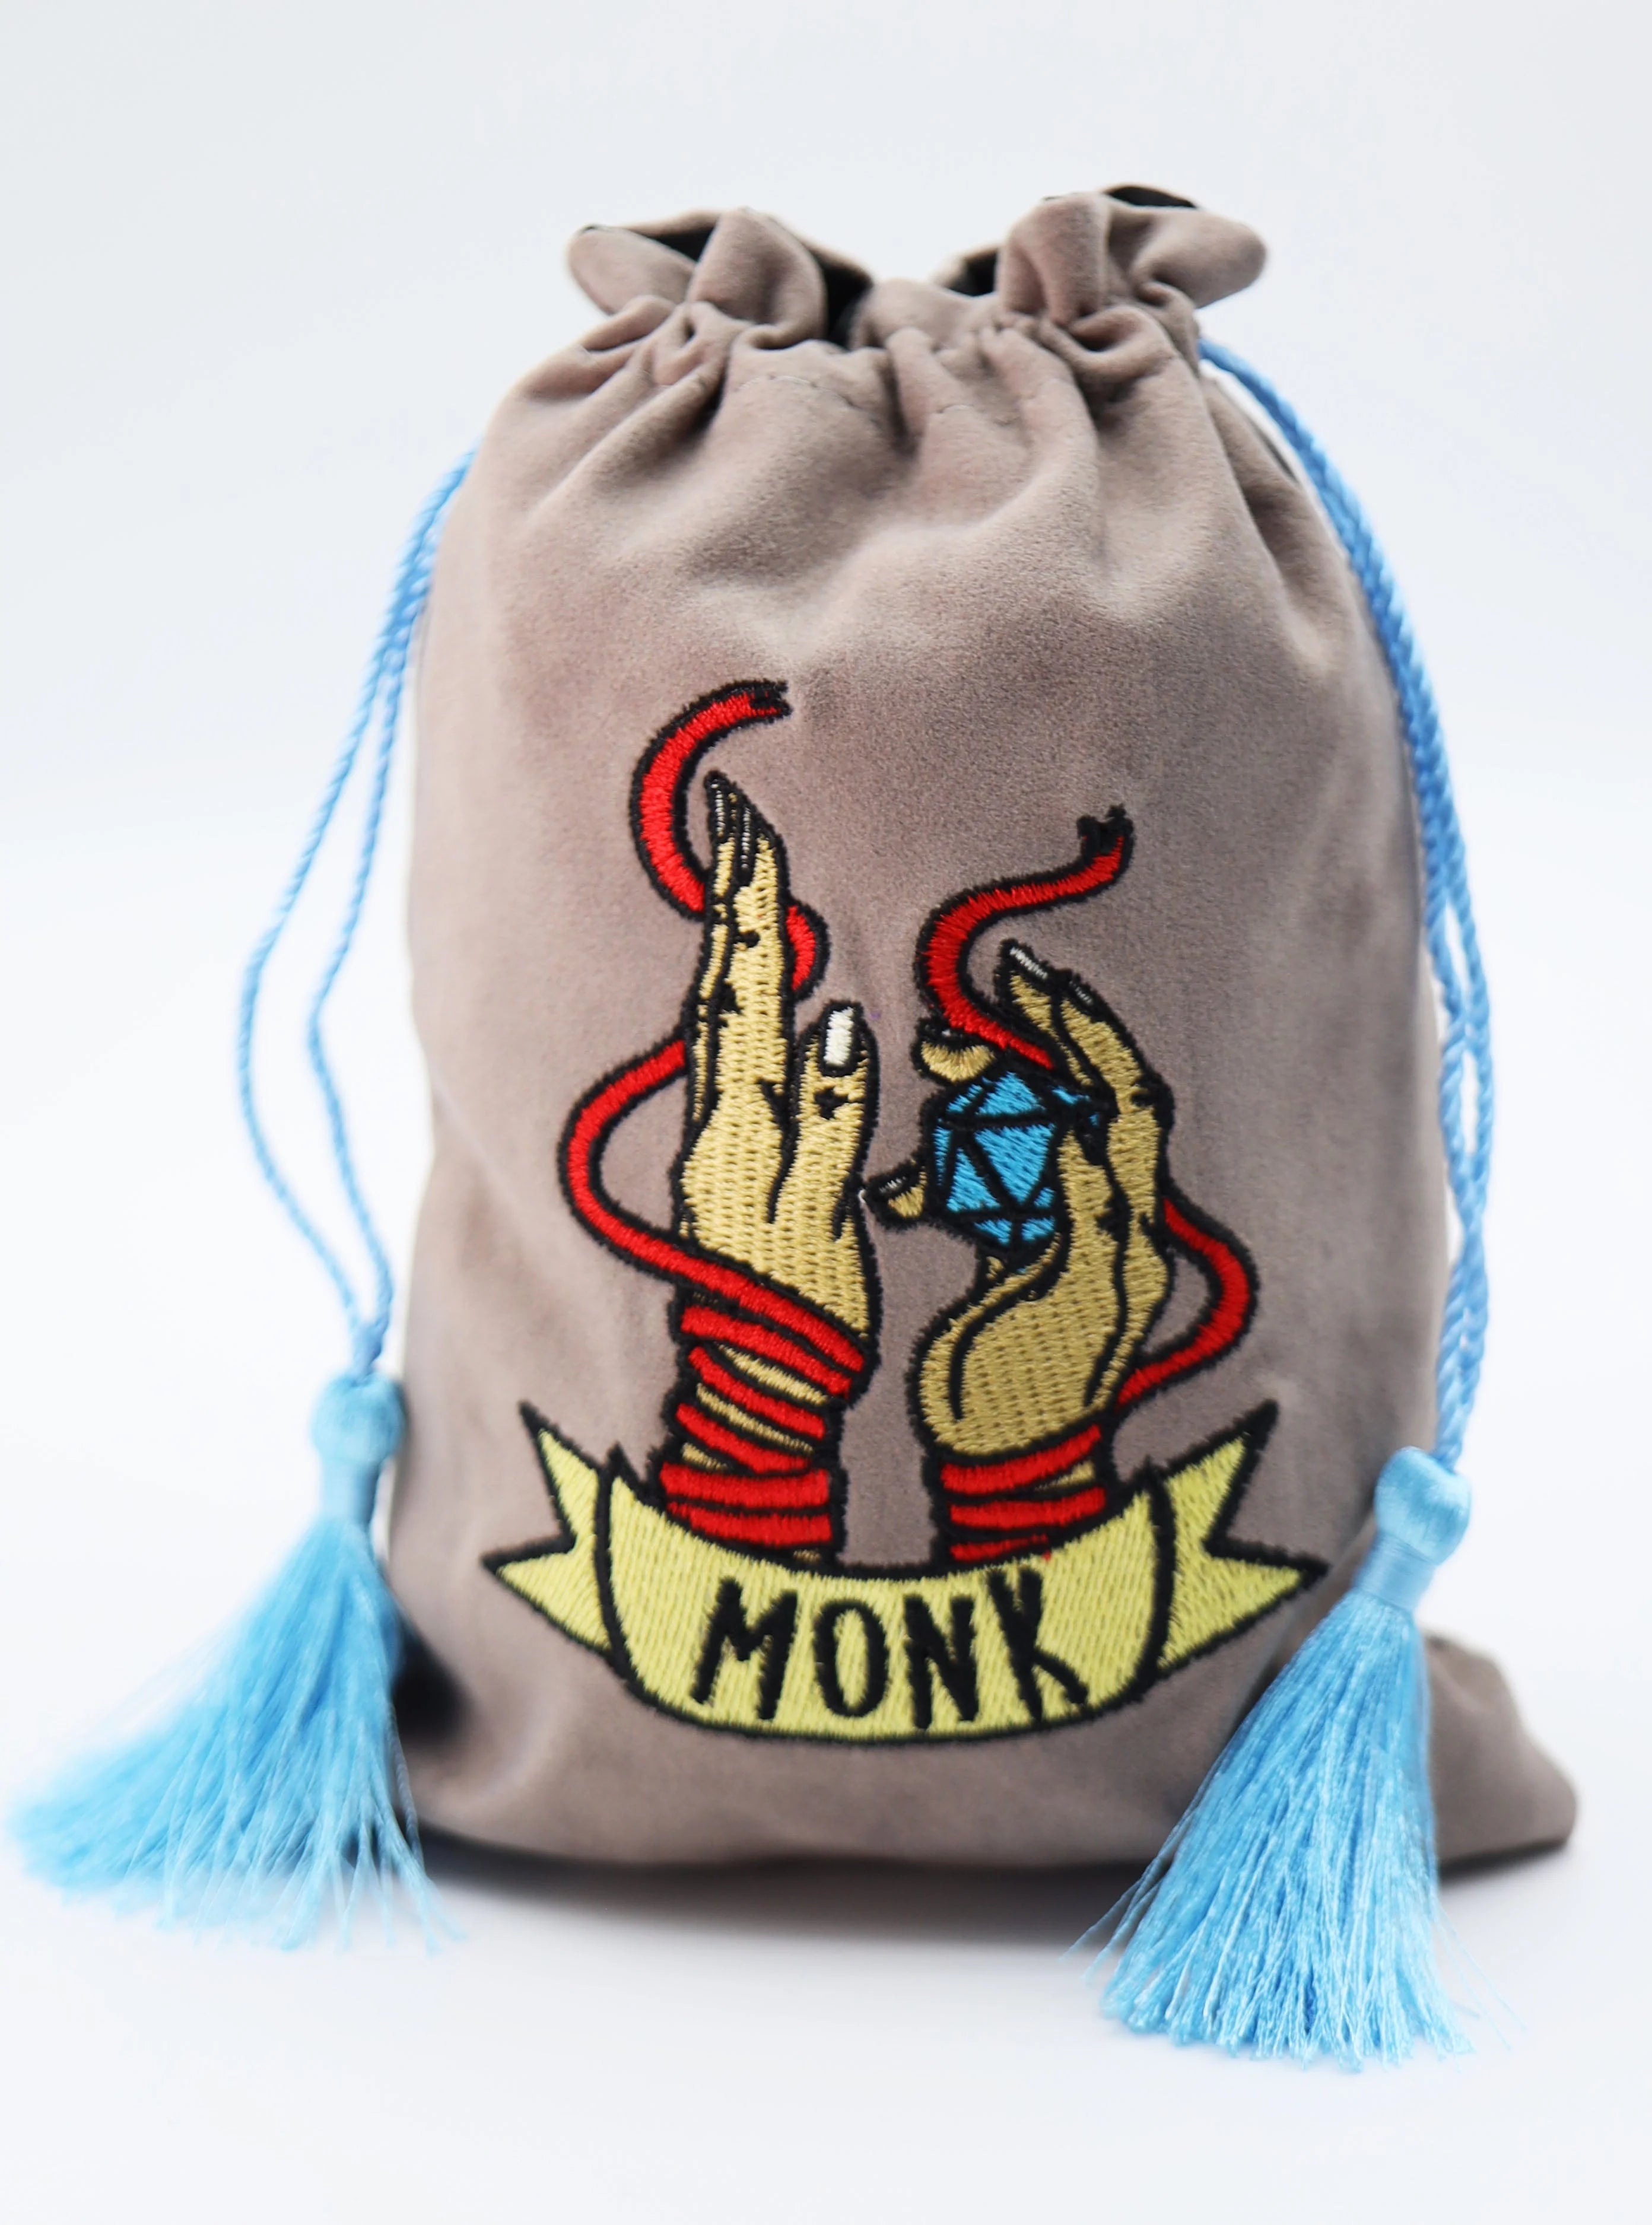 DICE BAG - MONK Dice & Counters Foam Brain Games    | Red Claw Gaming